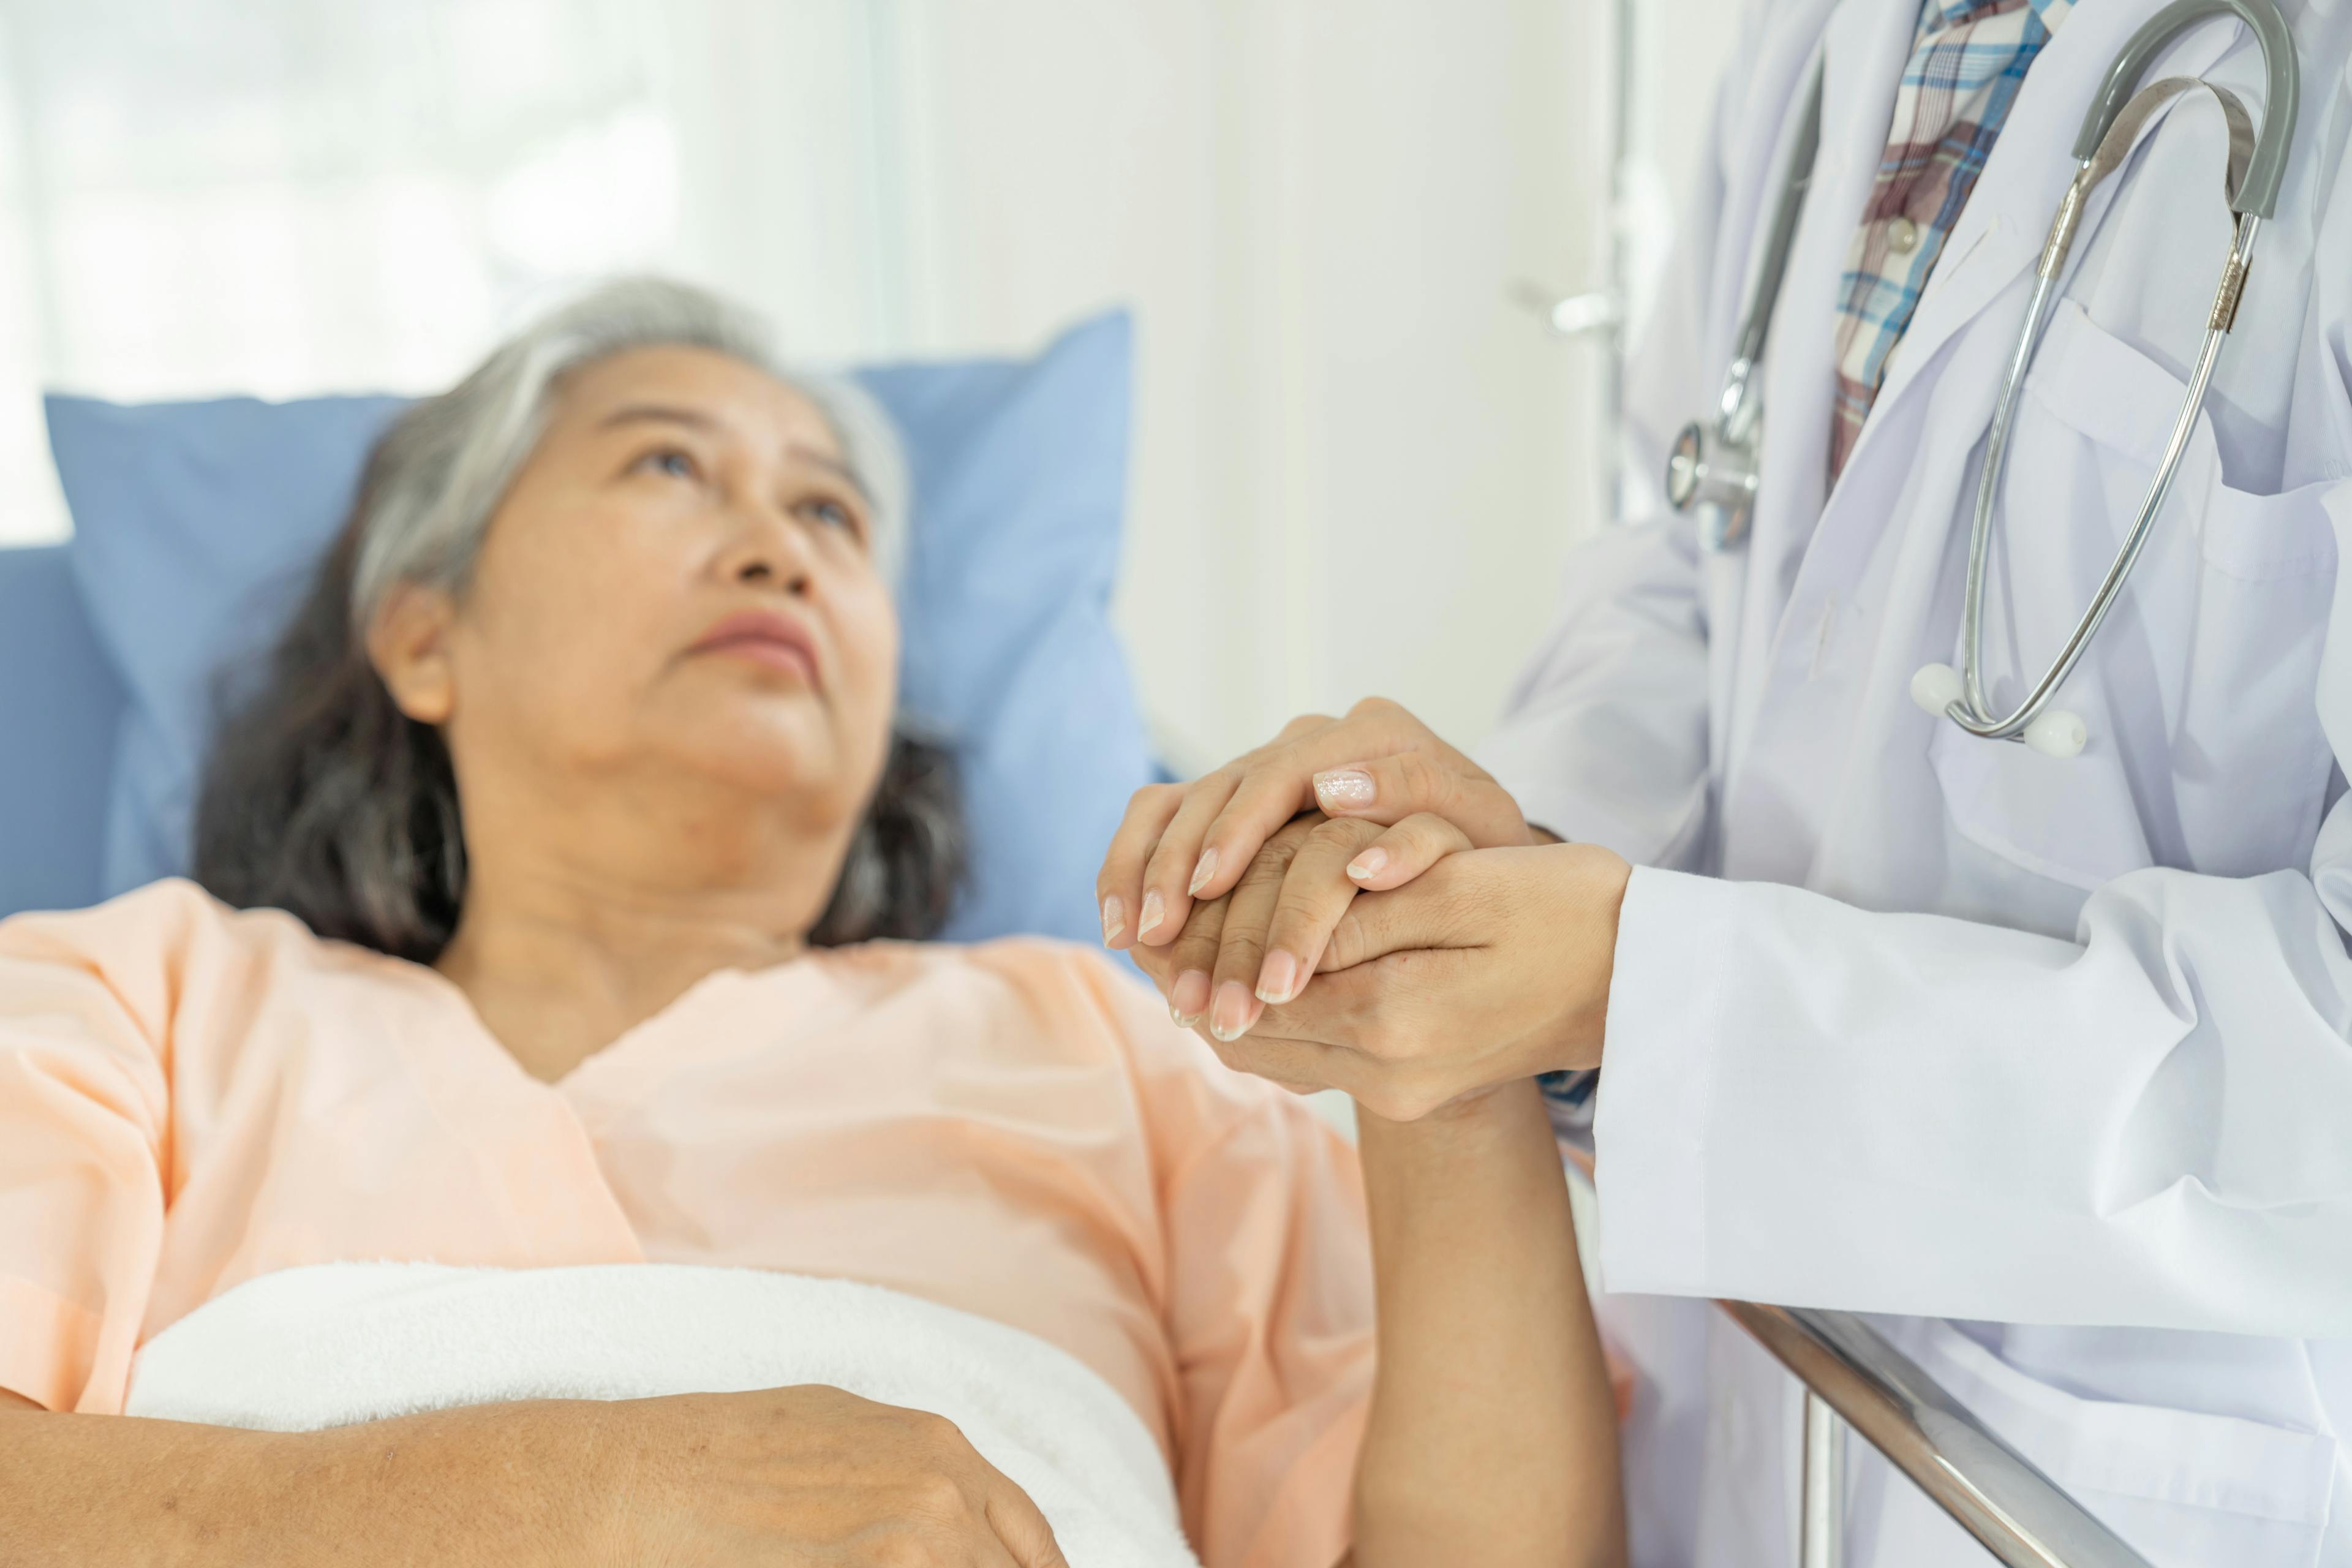 <a href="https://www.freepik.com/free-photo/doctors-hold-hands-encourage-elderly-senior-woman-patients-hospital-senior-female-medical-healthcare-concept_7813355.htm#query=palliative%20care%20elderly%20asian&position=18&from_view=search&track=ais&uuid=9e4b7009-17b2-449a-846b-9843f6cdd0db">Image by jcomp</a> on Freepik